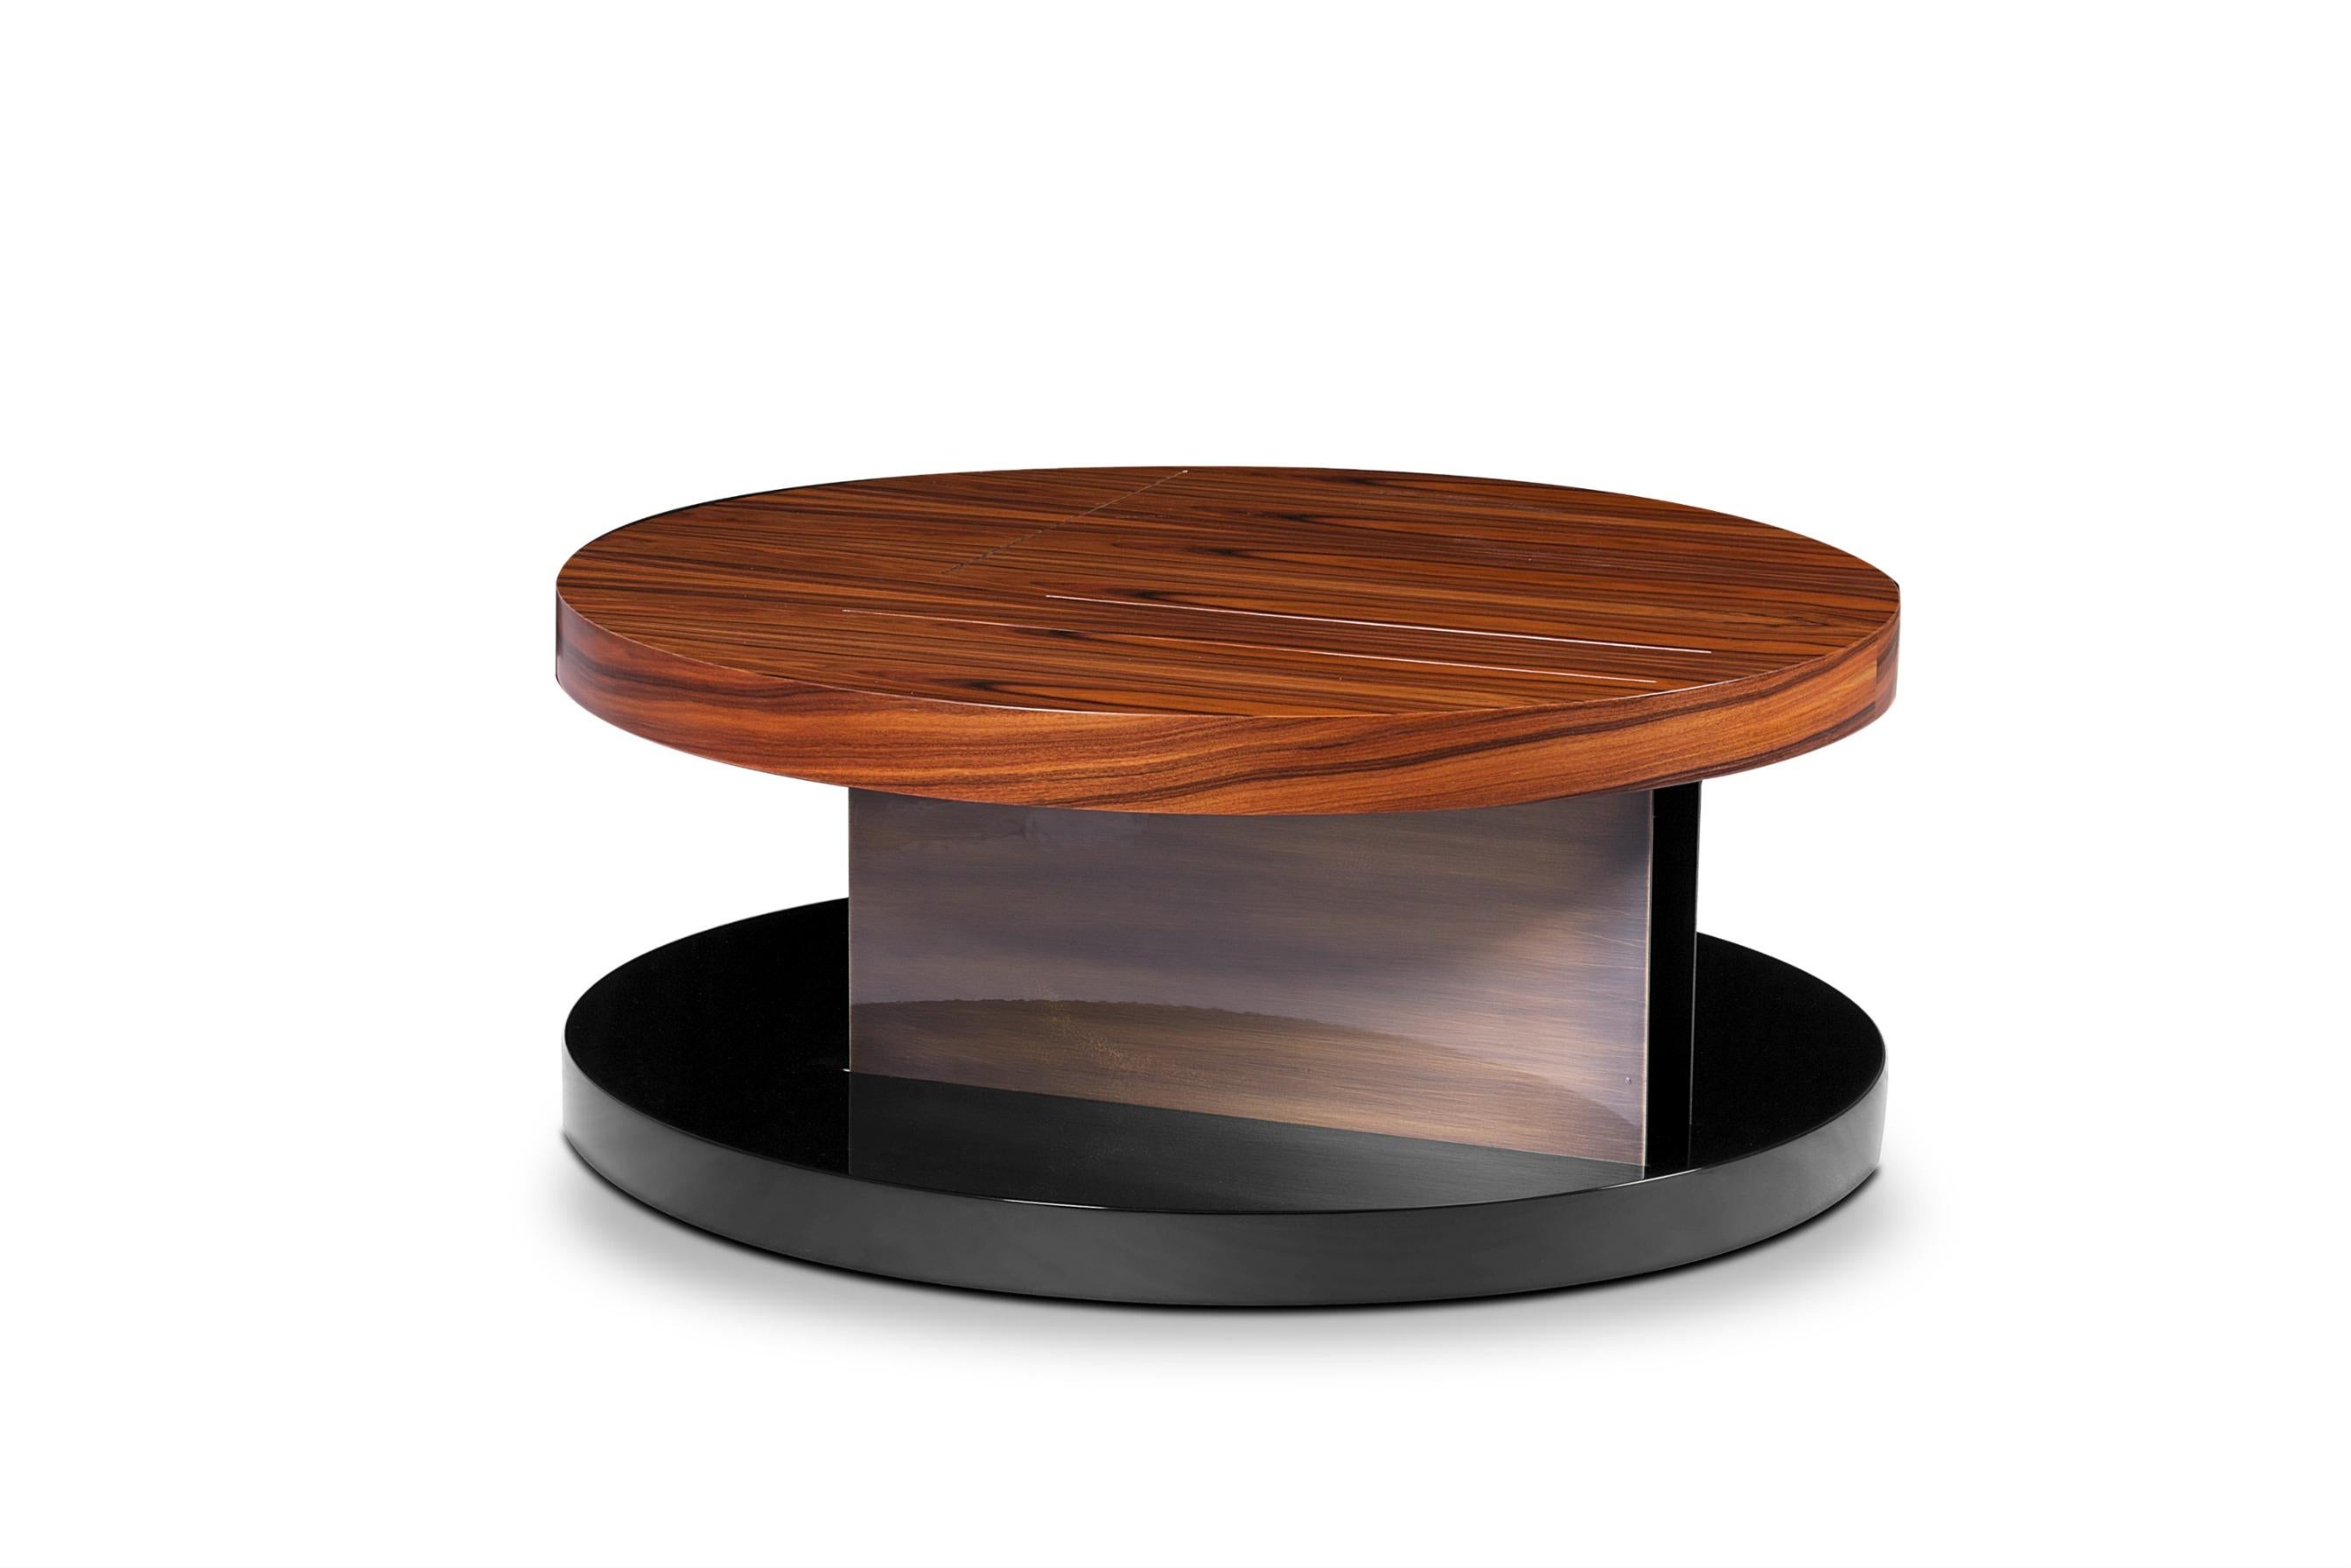 The lowlands of Scotland is called lallans, which also refers to a combination of some Scottish dialects. Just like lallans centre table combines four different materials and finishes, such as palisander wood veneer, black lacquer, polished brass